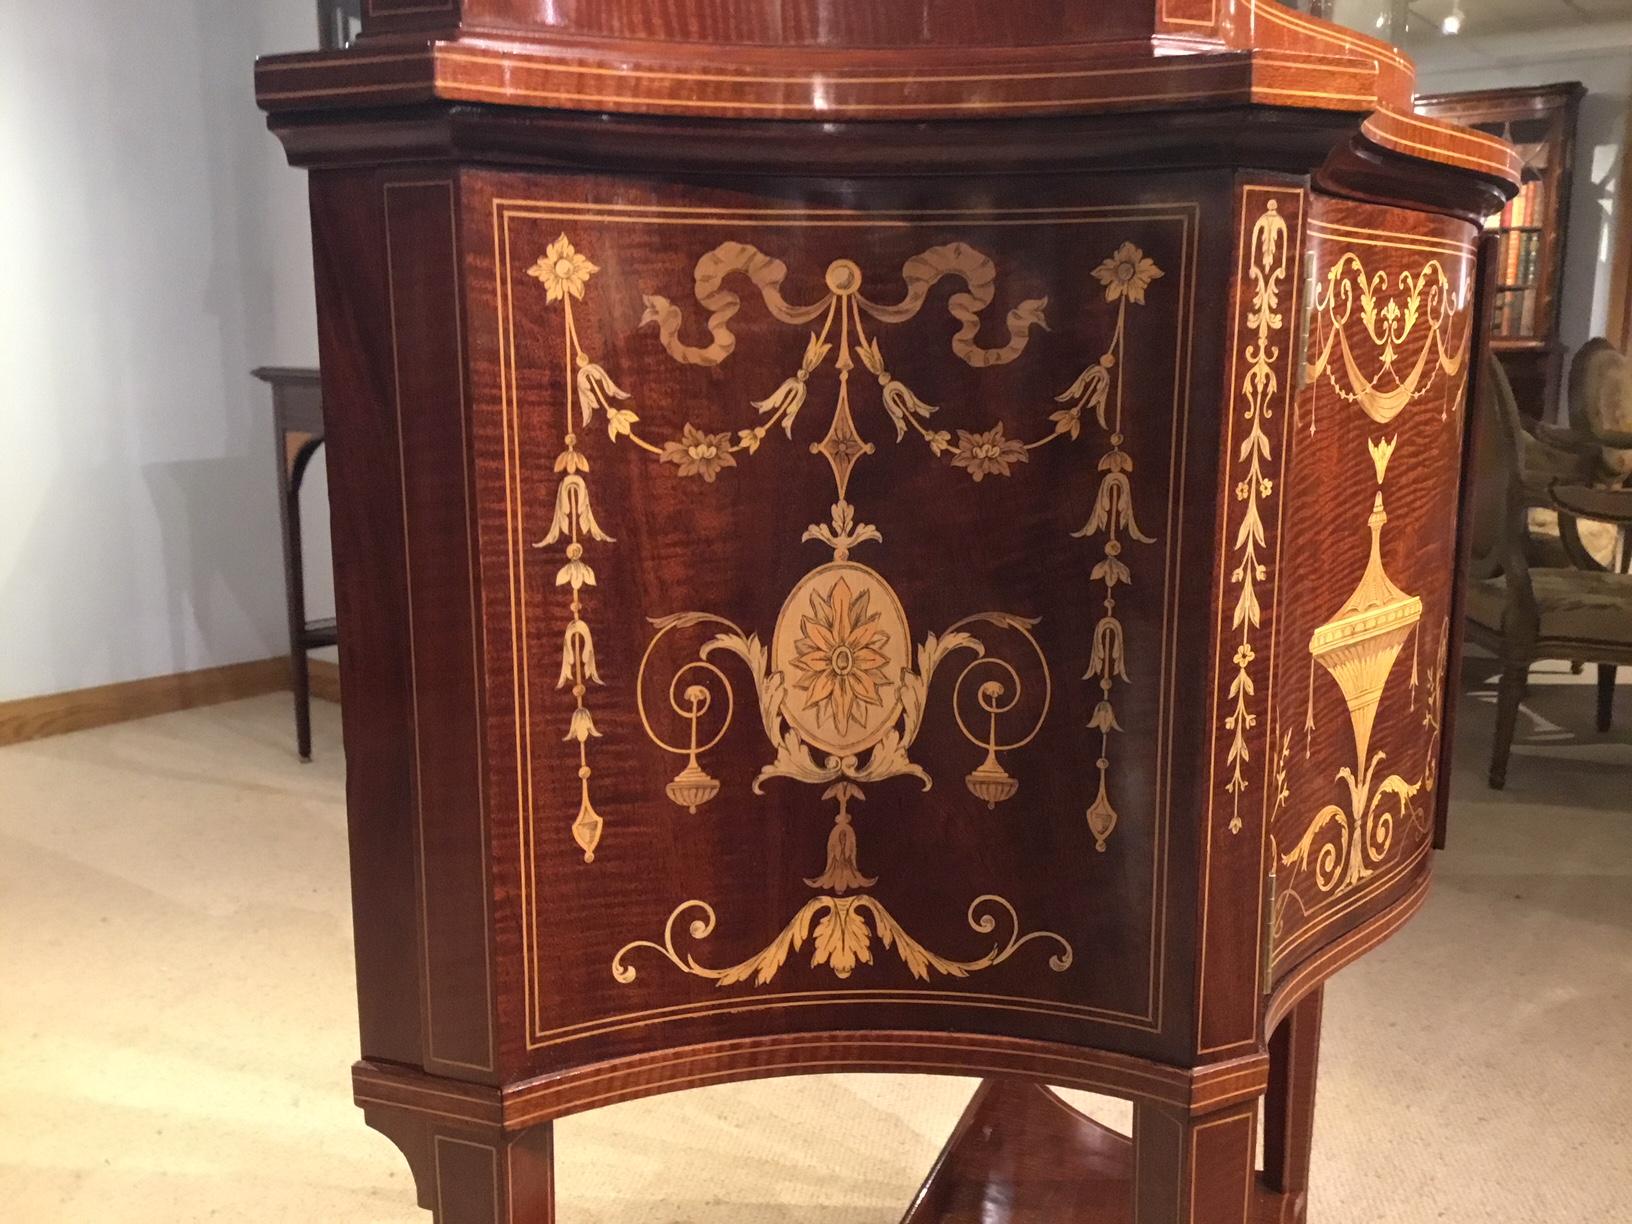 A fine quality marquetry inlaid Edwardian period serpentine cabinet by Maple & Co of London. The upper section with a marquetry and pen-work inlaid swan neck cornice above a serpentine shaped central glazed door, which opens to reveal a silk lined